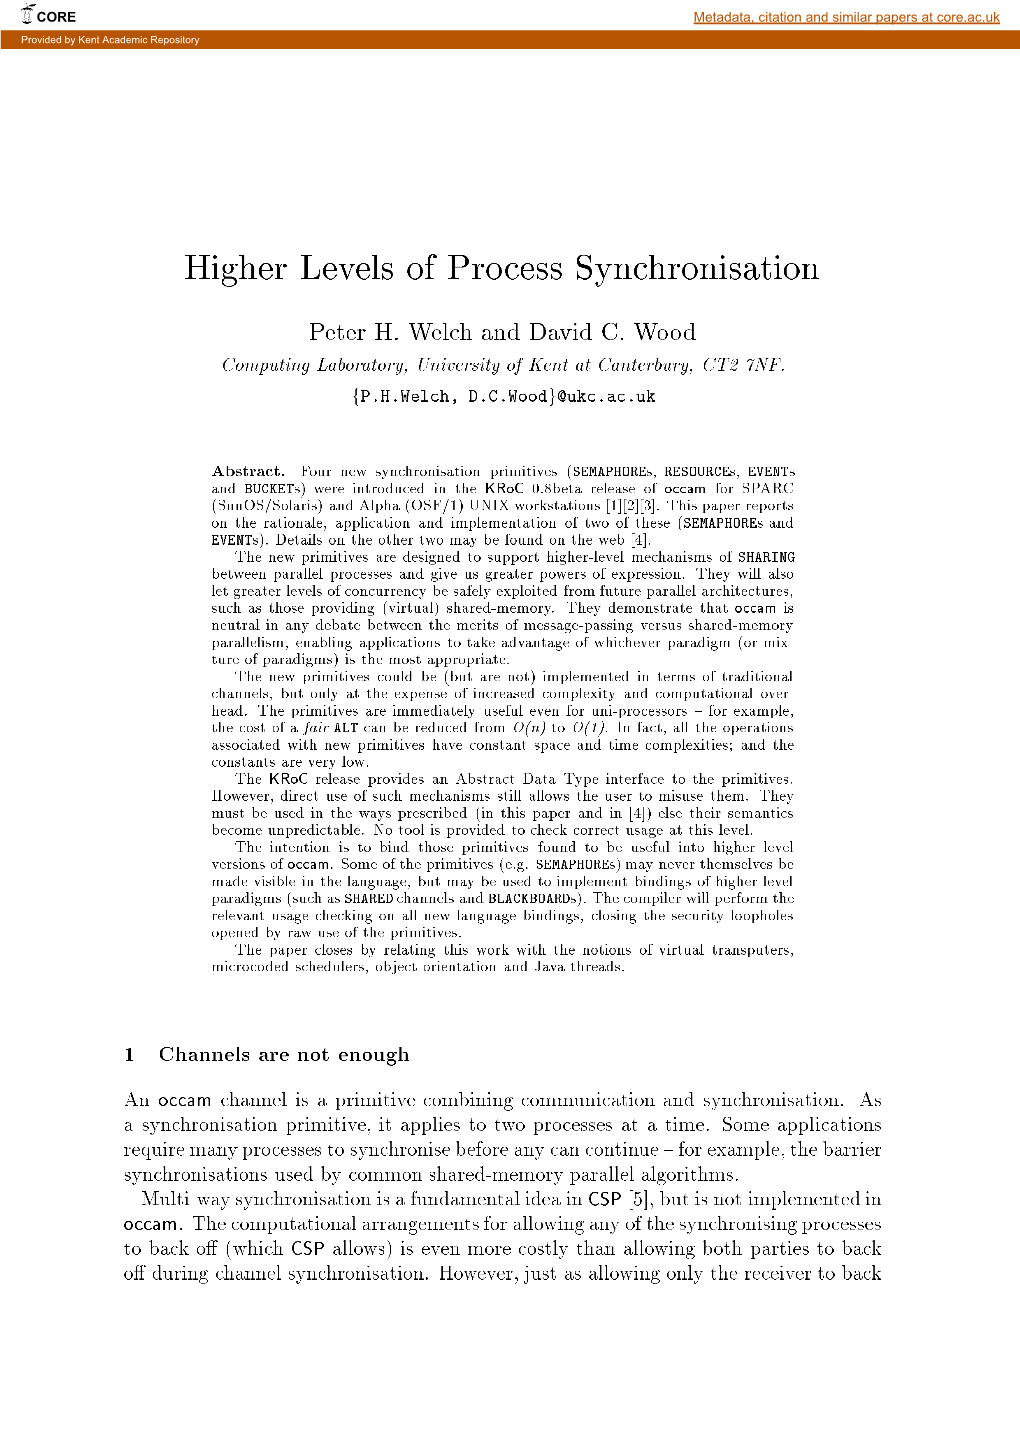 Higher Levels of Process Synchronisation